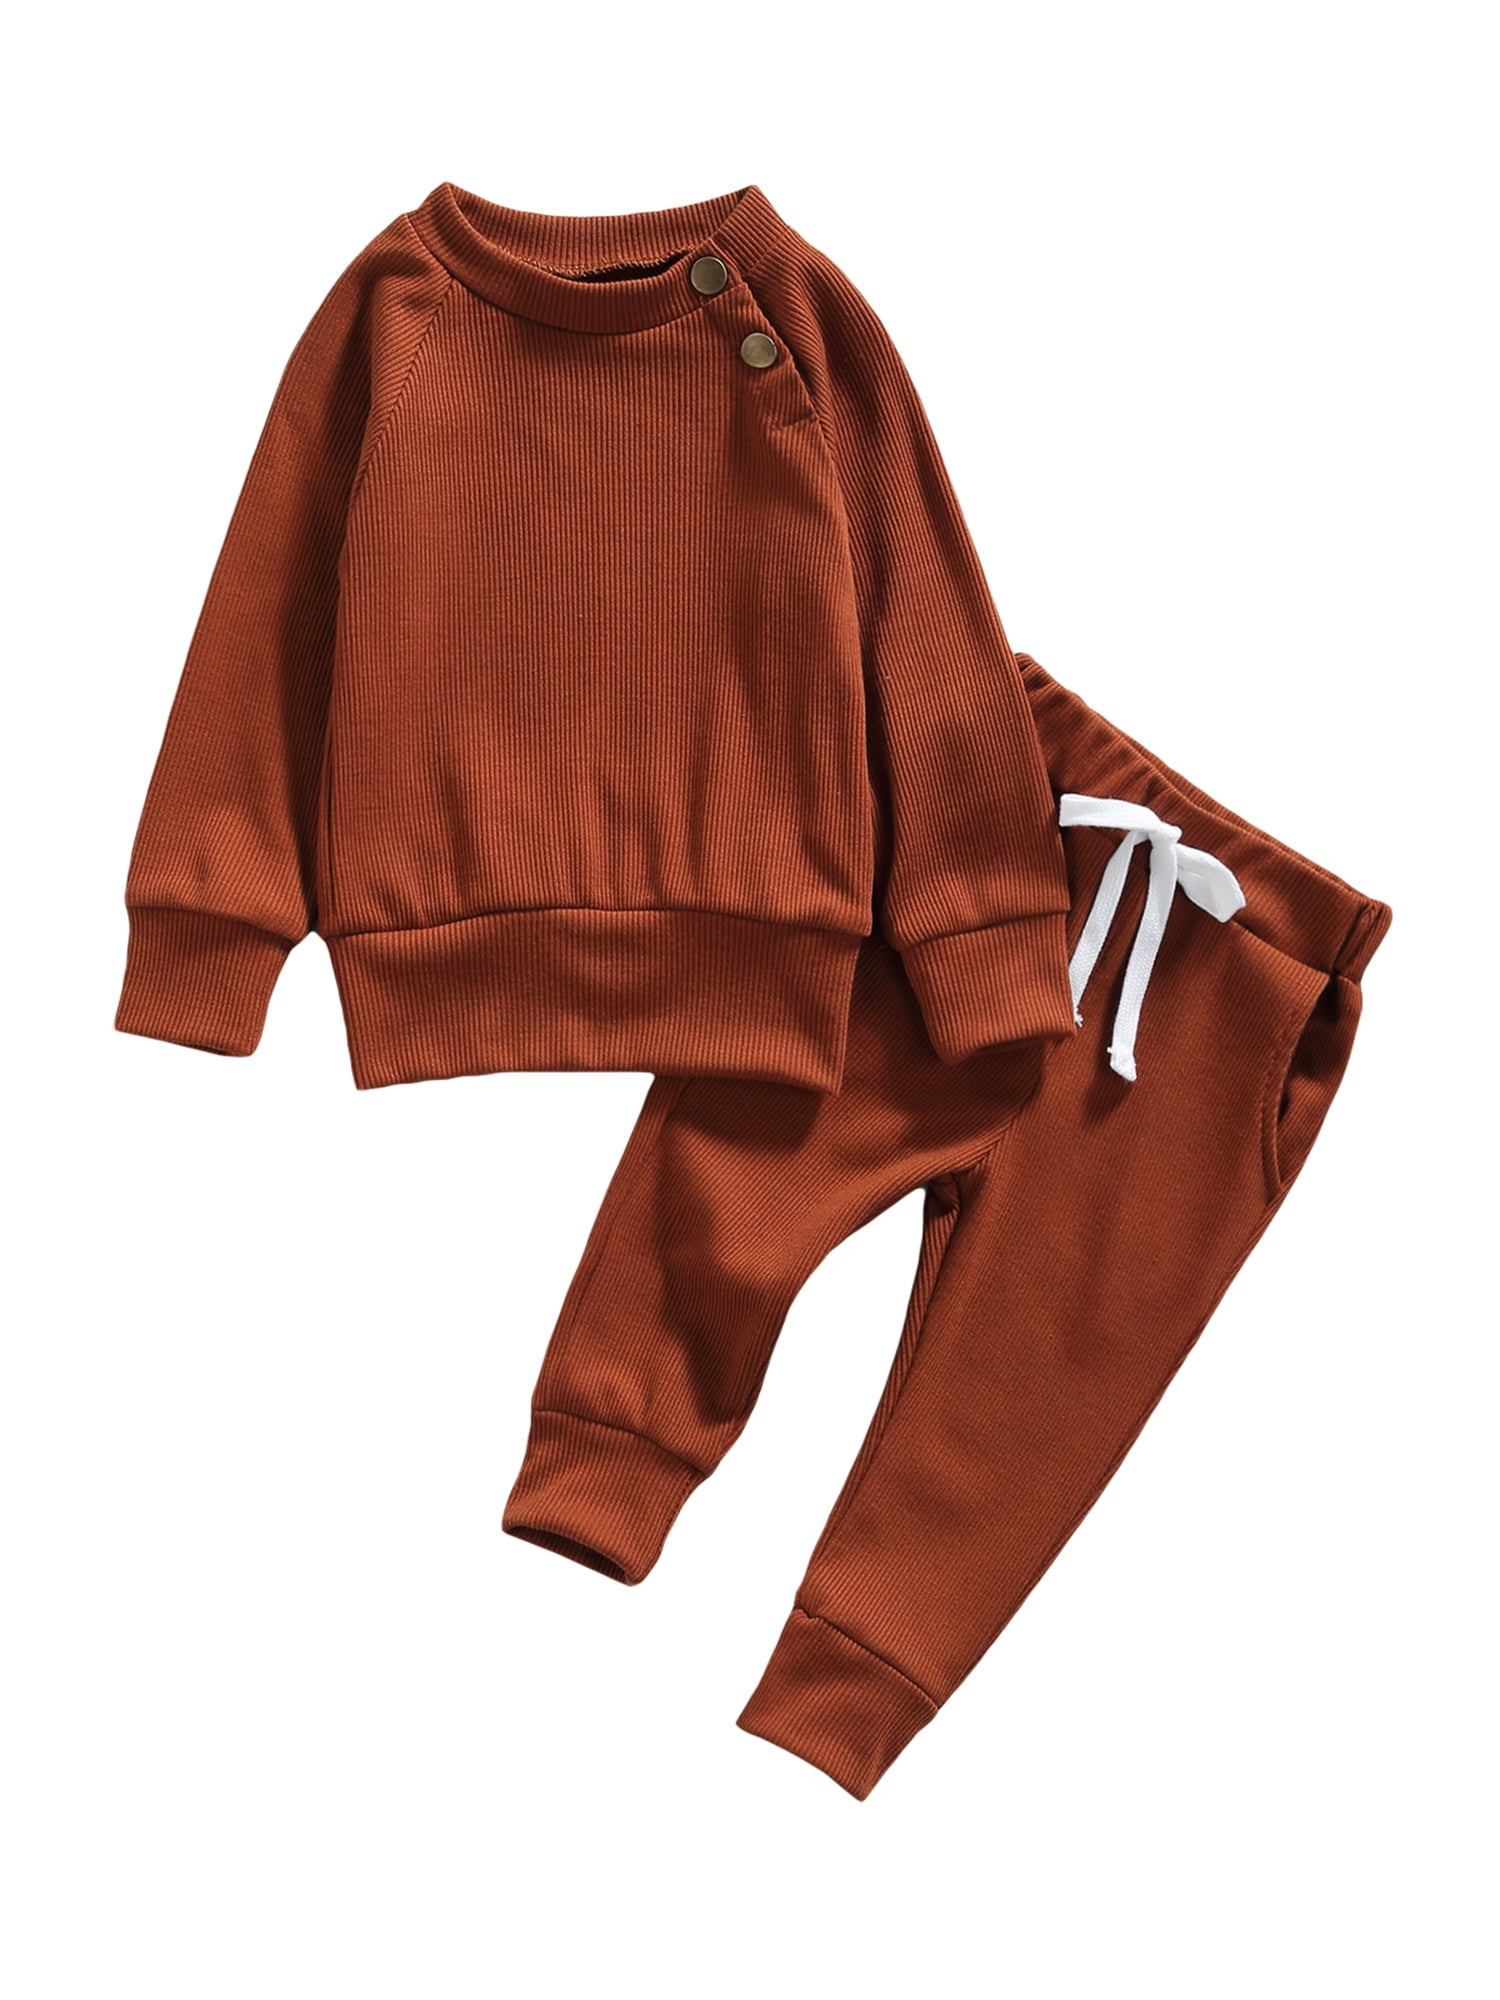 2PCS Toddler Baby Boy Girls Clothes Sweatshirt Tops Pants Tracksuit Outfits Set 